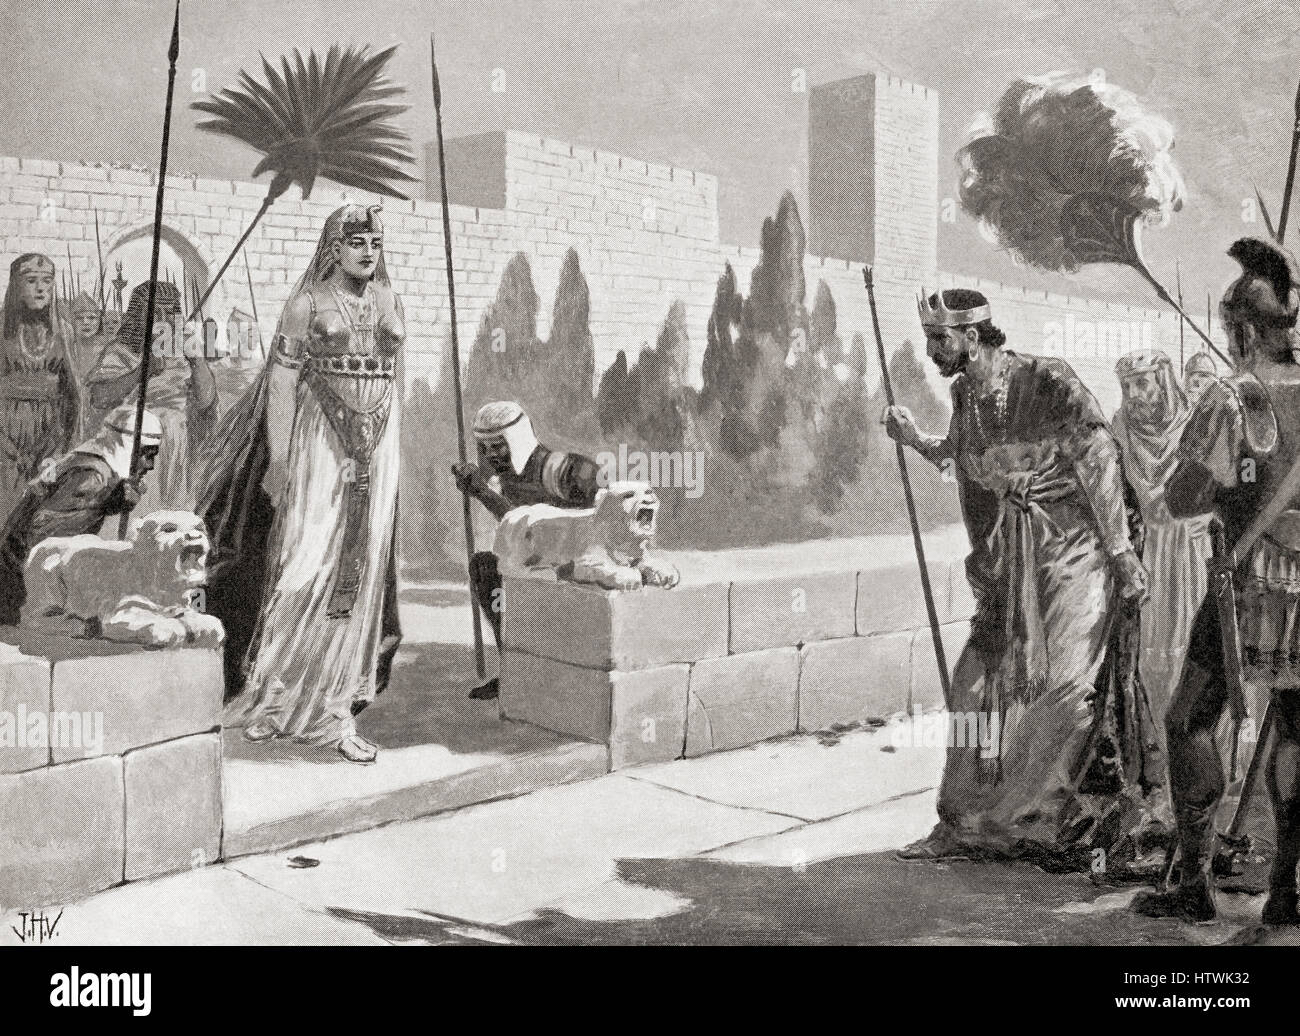 Cleopatra visits Herod at Jerusalem, 33 B.C. Cleopatra VII Philopator, 69 - 30 BC.  Last active ruler of Ptolemaic Egypt.  Herod, 74/73 BCE – 4 BC, aka Herod the Great and Herod I. King of Judea.  From Hutchinson's History of the Nations, published 1915. Stock Photo